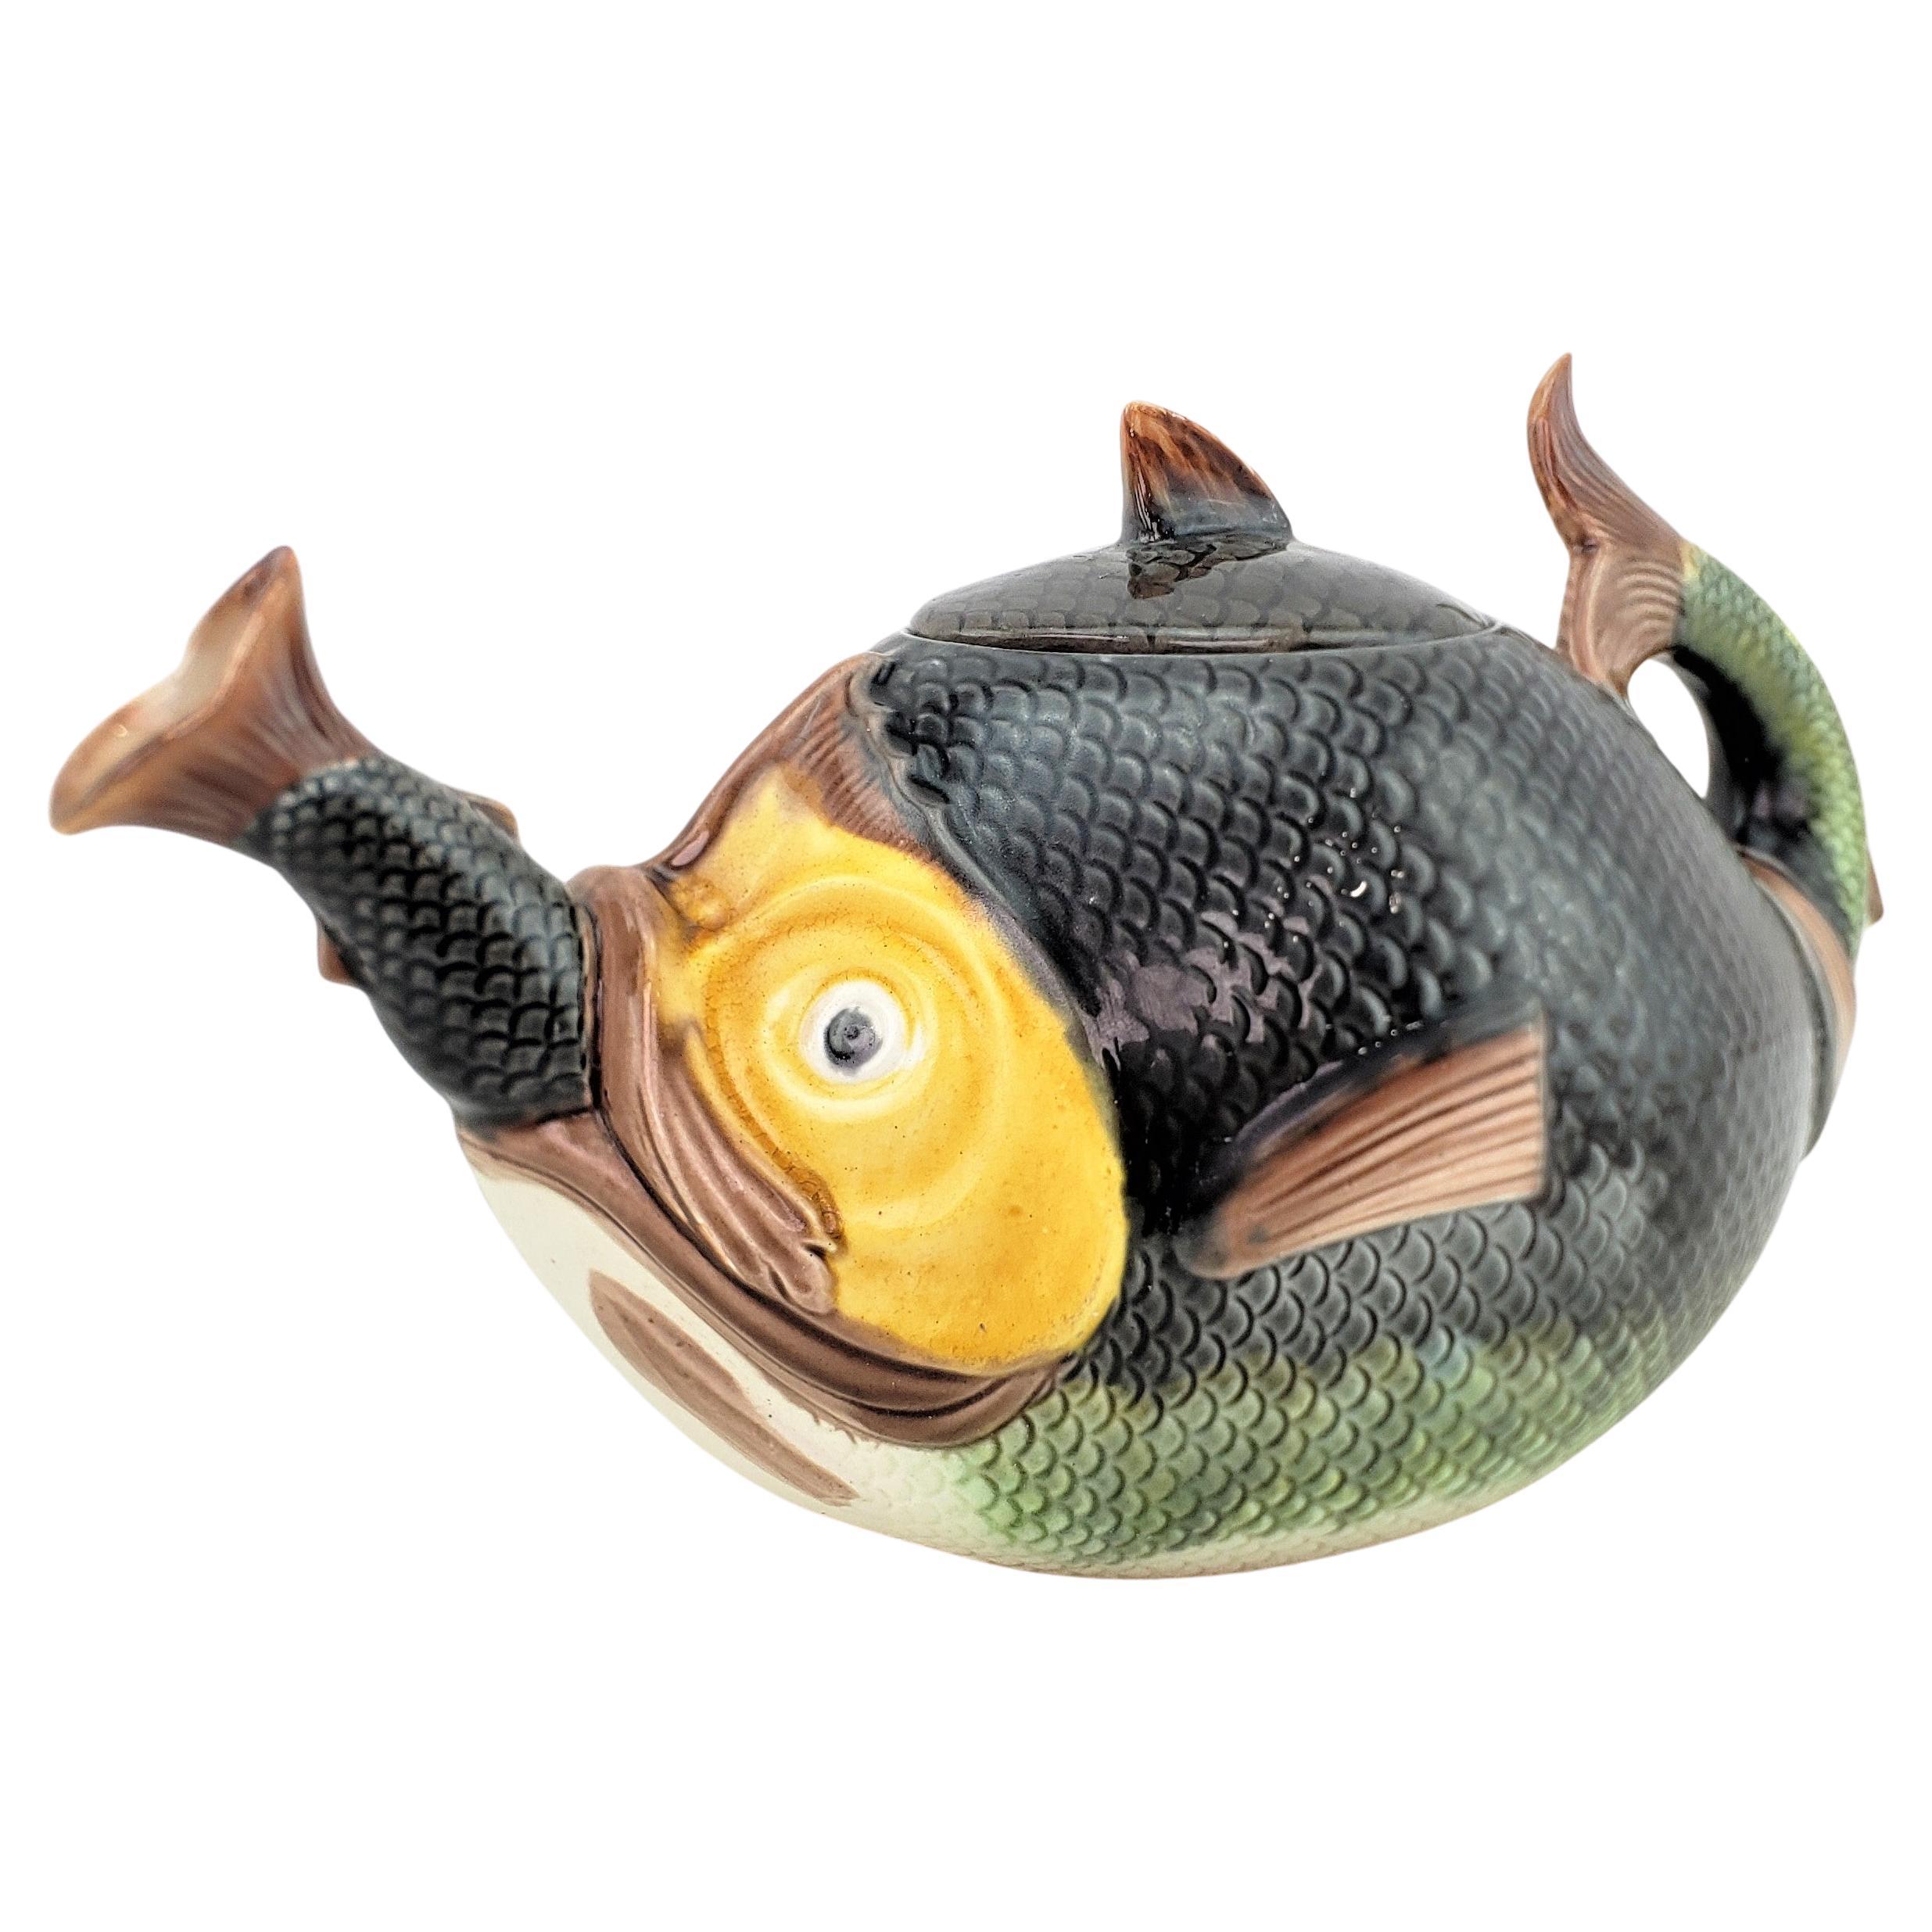 Antique English Majolica Whimsical Figural Cannibalistic Fish Teapot For Sale